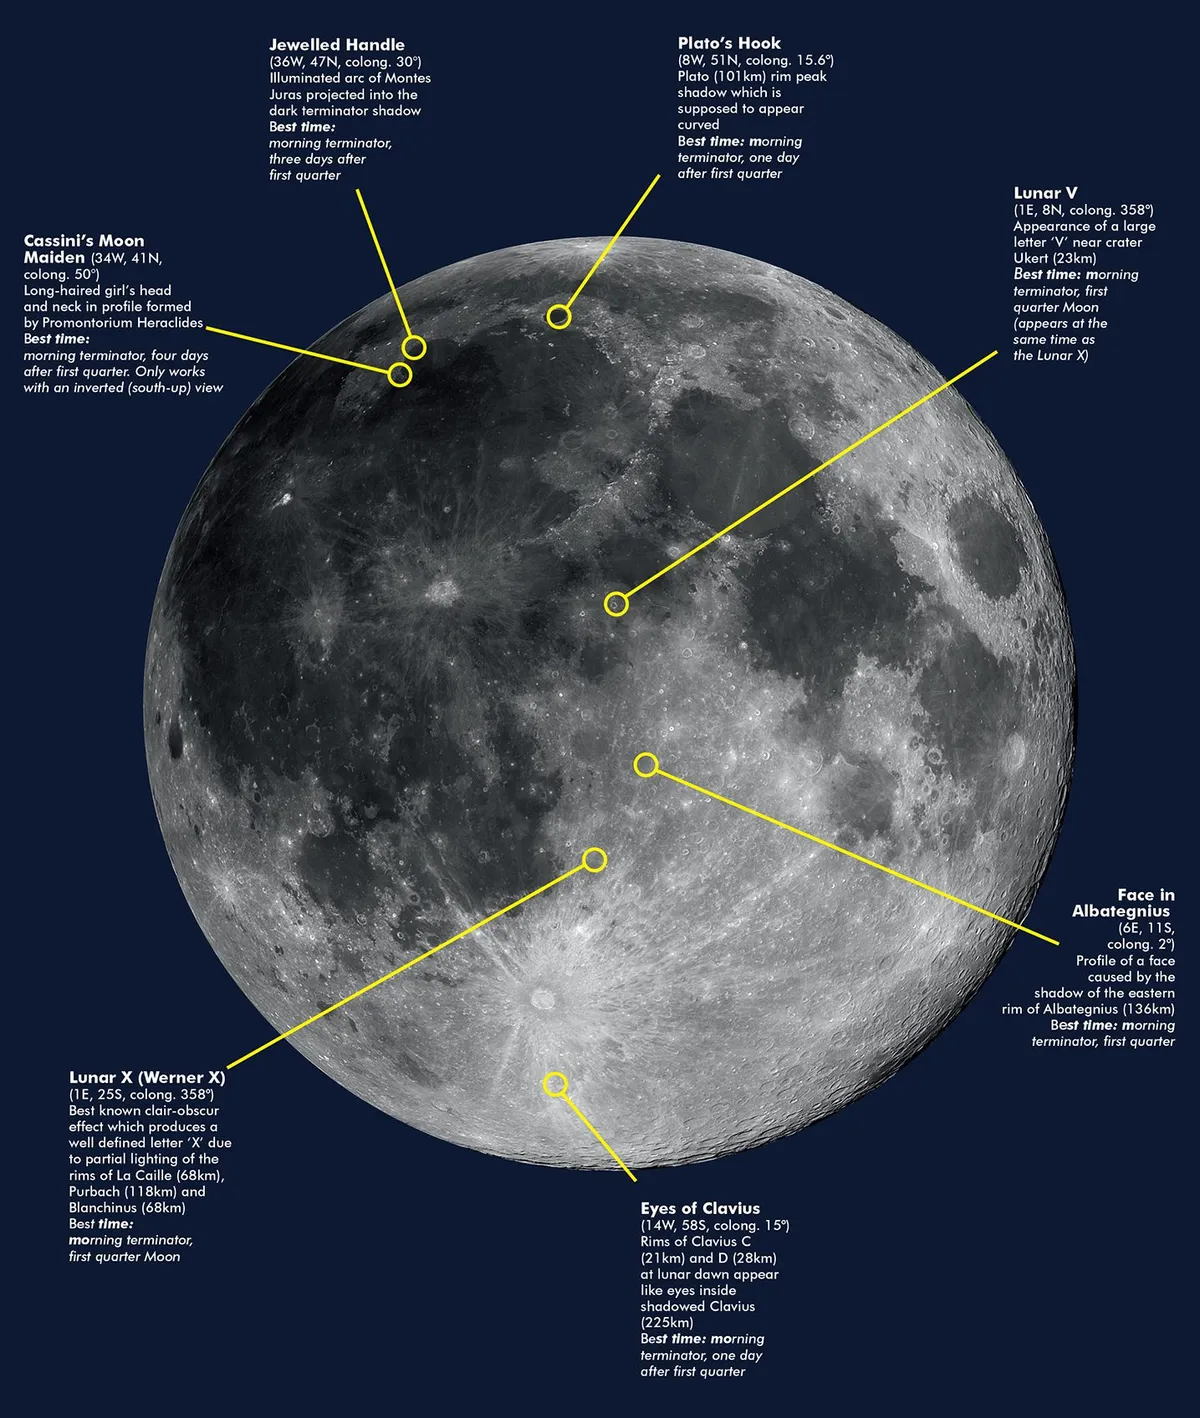 A map of clair obscur effects on the Moon. Credit: Pete Lawrence